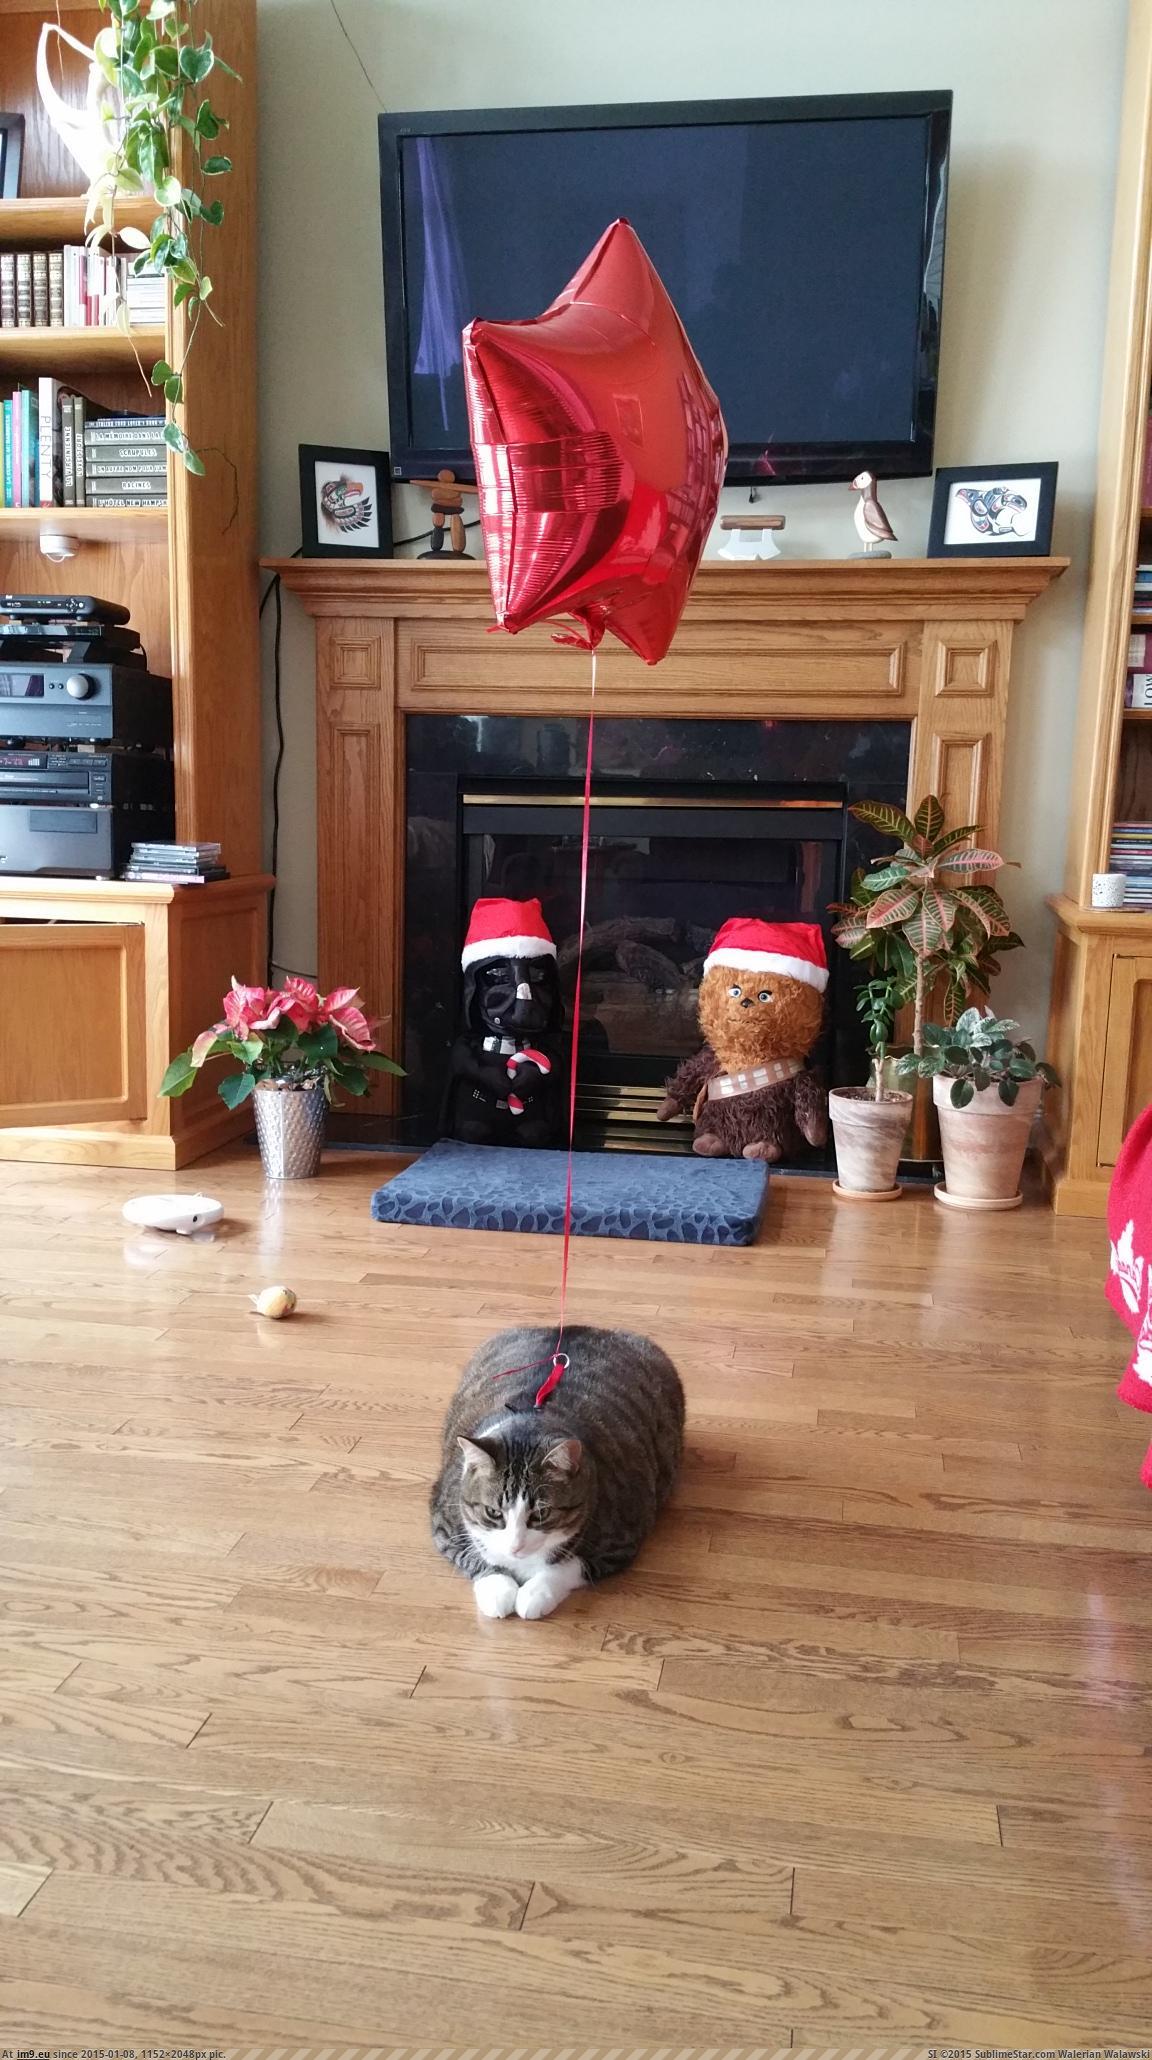 [Aww] Kept losing my cat inside my parents' house during Xmas break so I improvised (in My r/AWW favs)